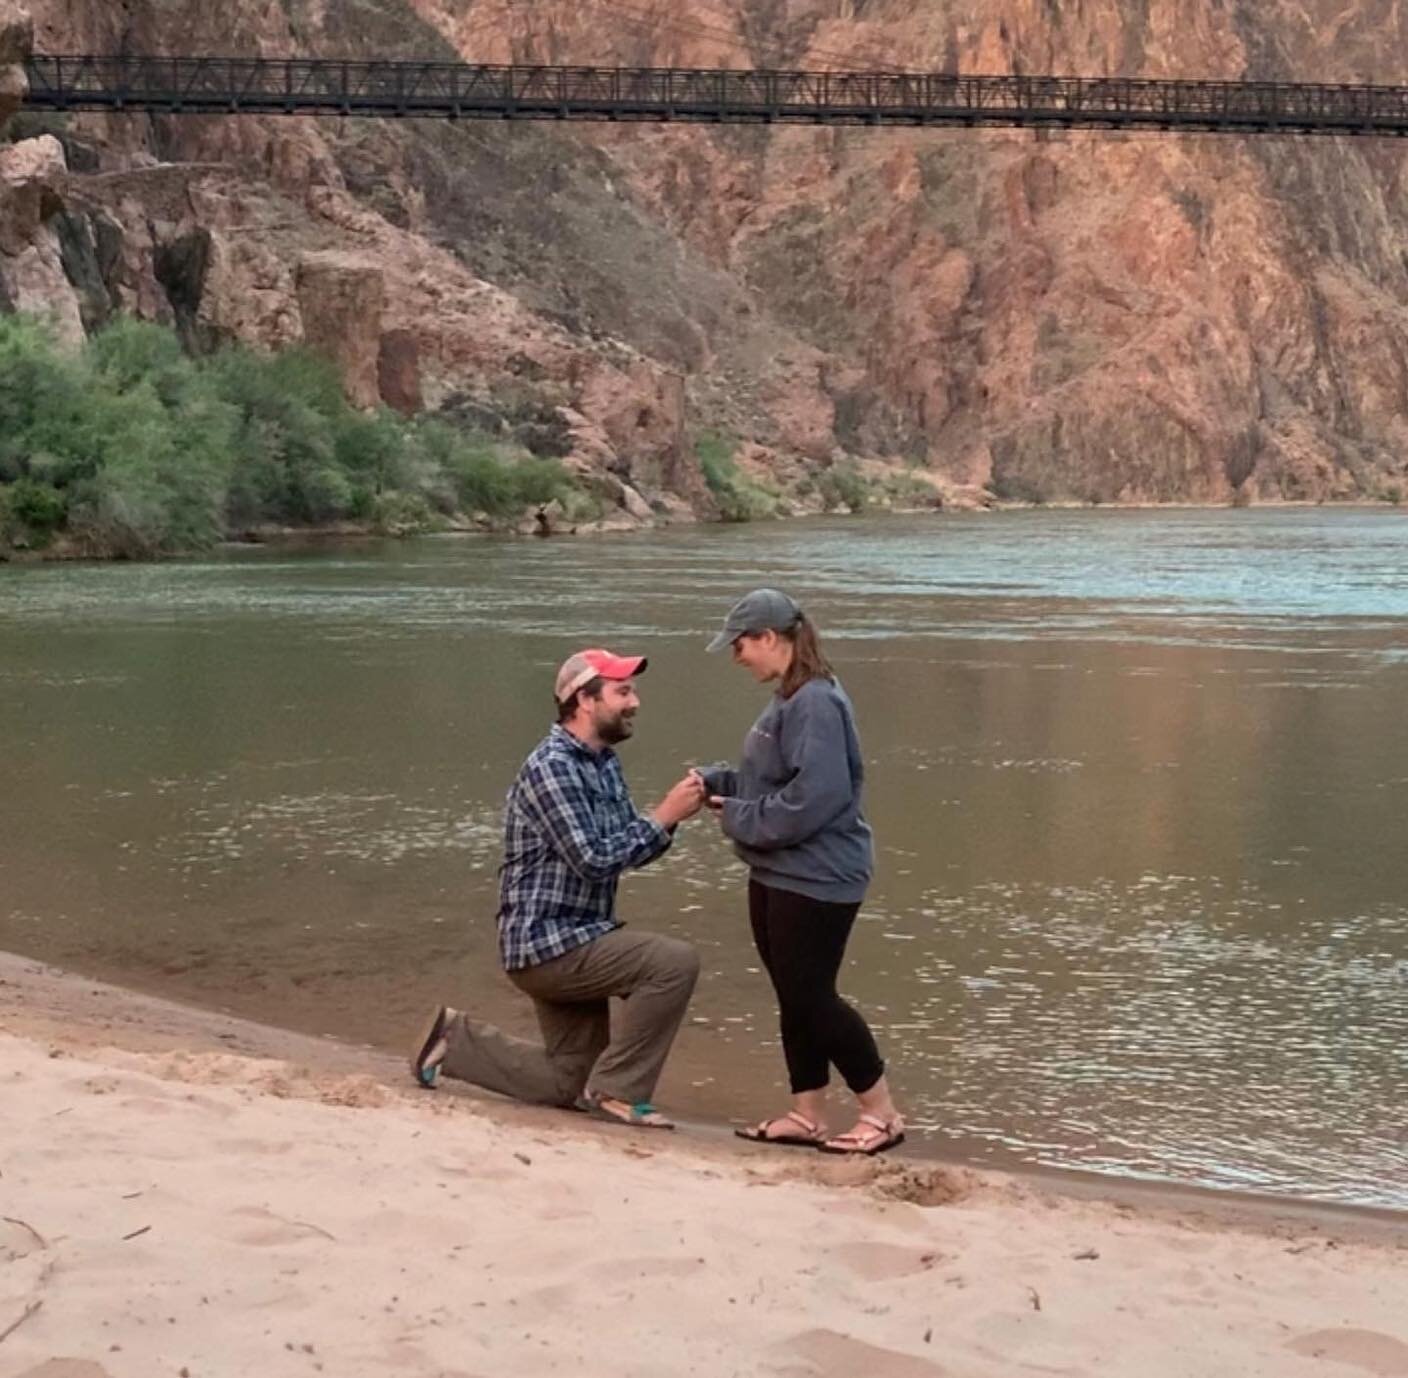 Found a surprise at the bottom of the canyon last week!!

Last Monday, Tyler asked me to be his forever adventure partner while standing on Boat Beach next to the Colorado River. Of course, my brain imploded and the best thing I could think to say wa